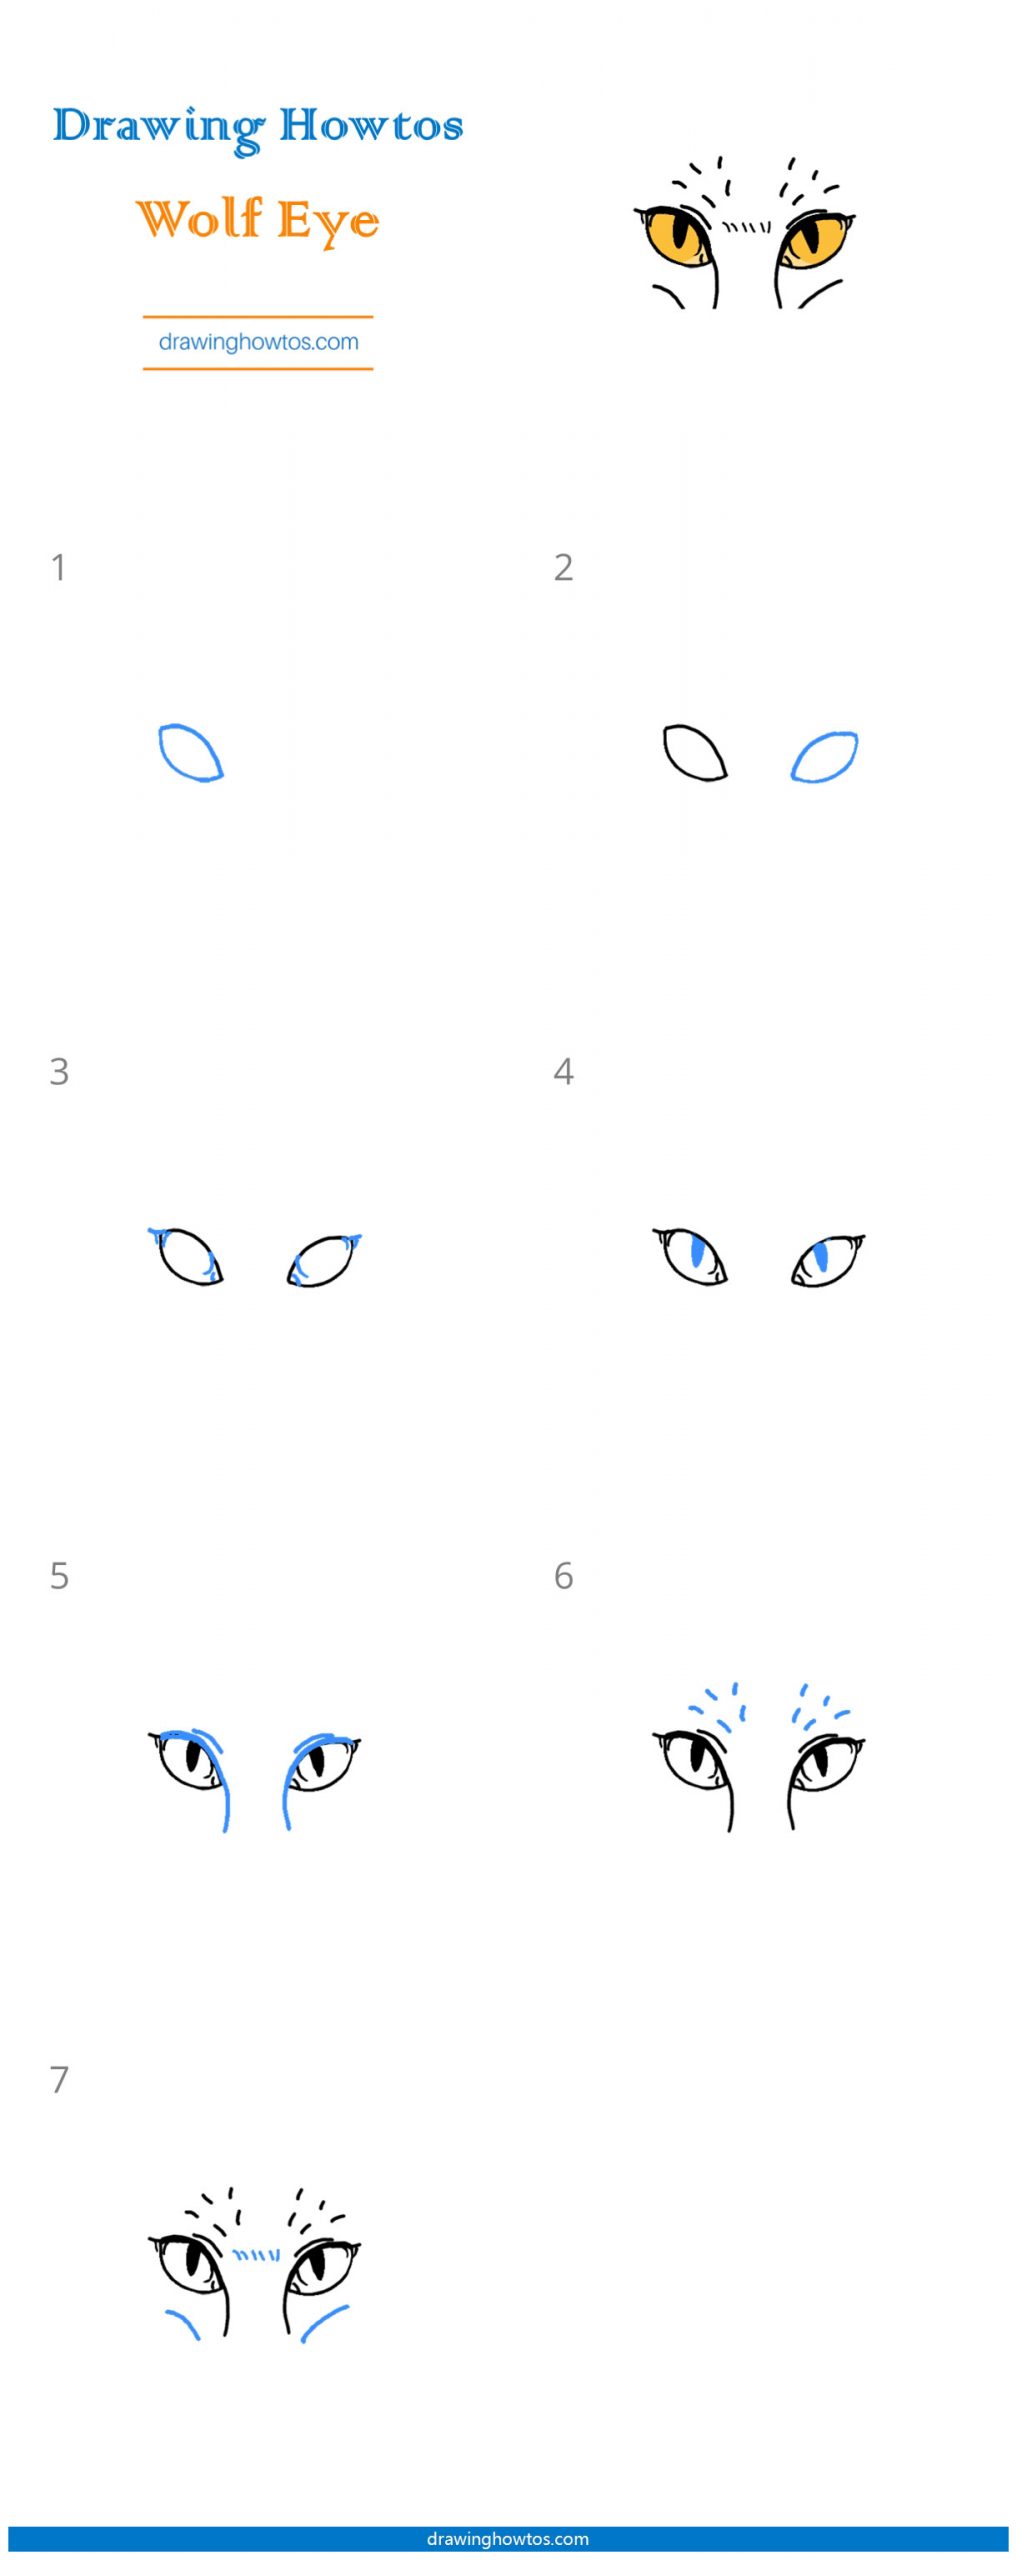 How to Draw Wolf Eyes - Step by Step Easy Drawing Guides - Drawing Howtos